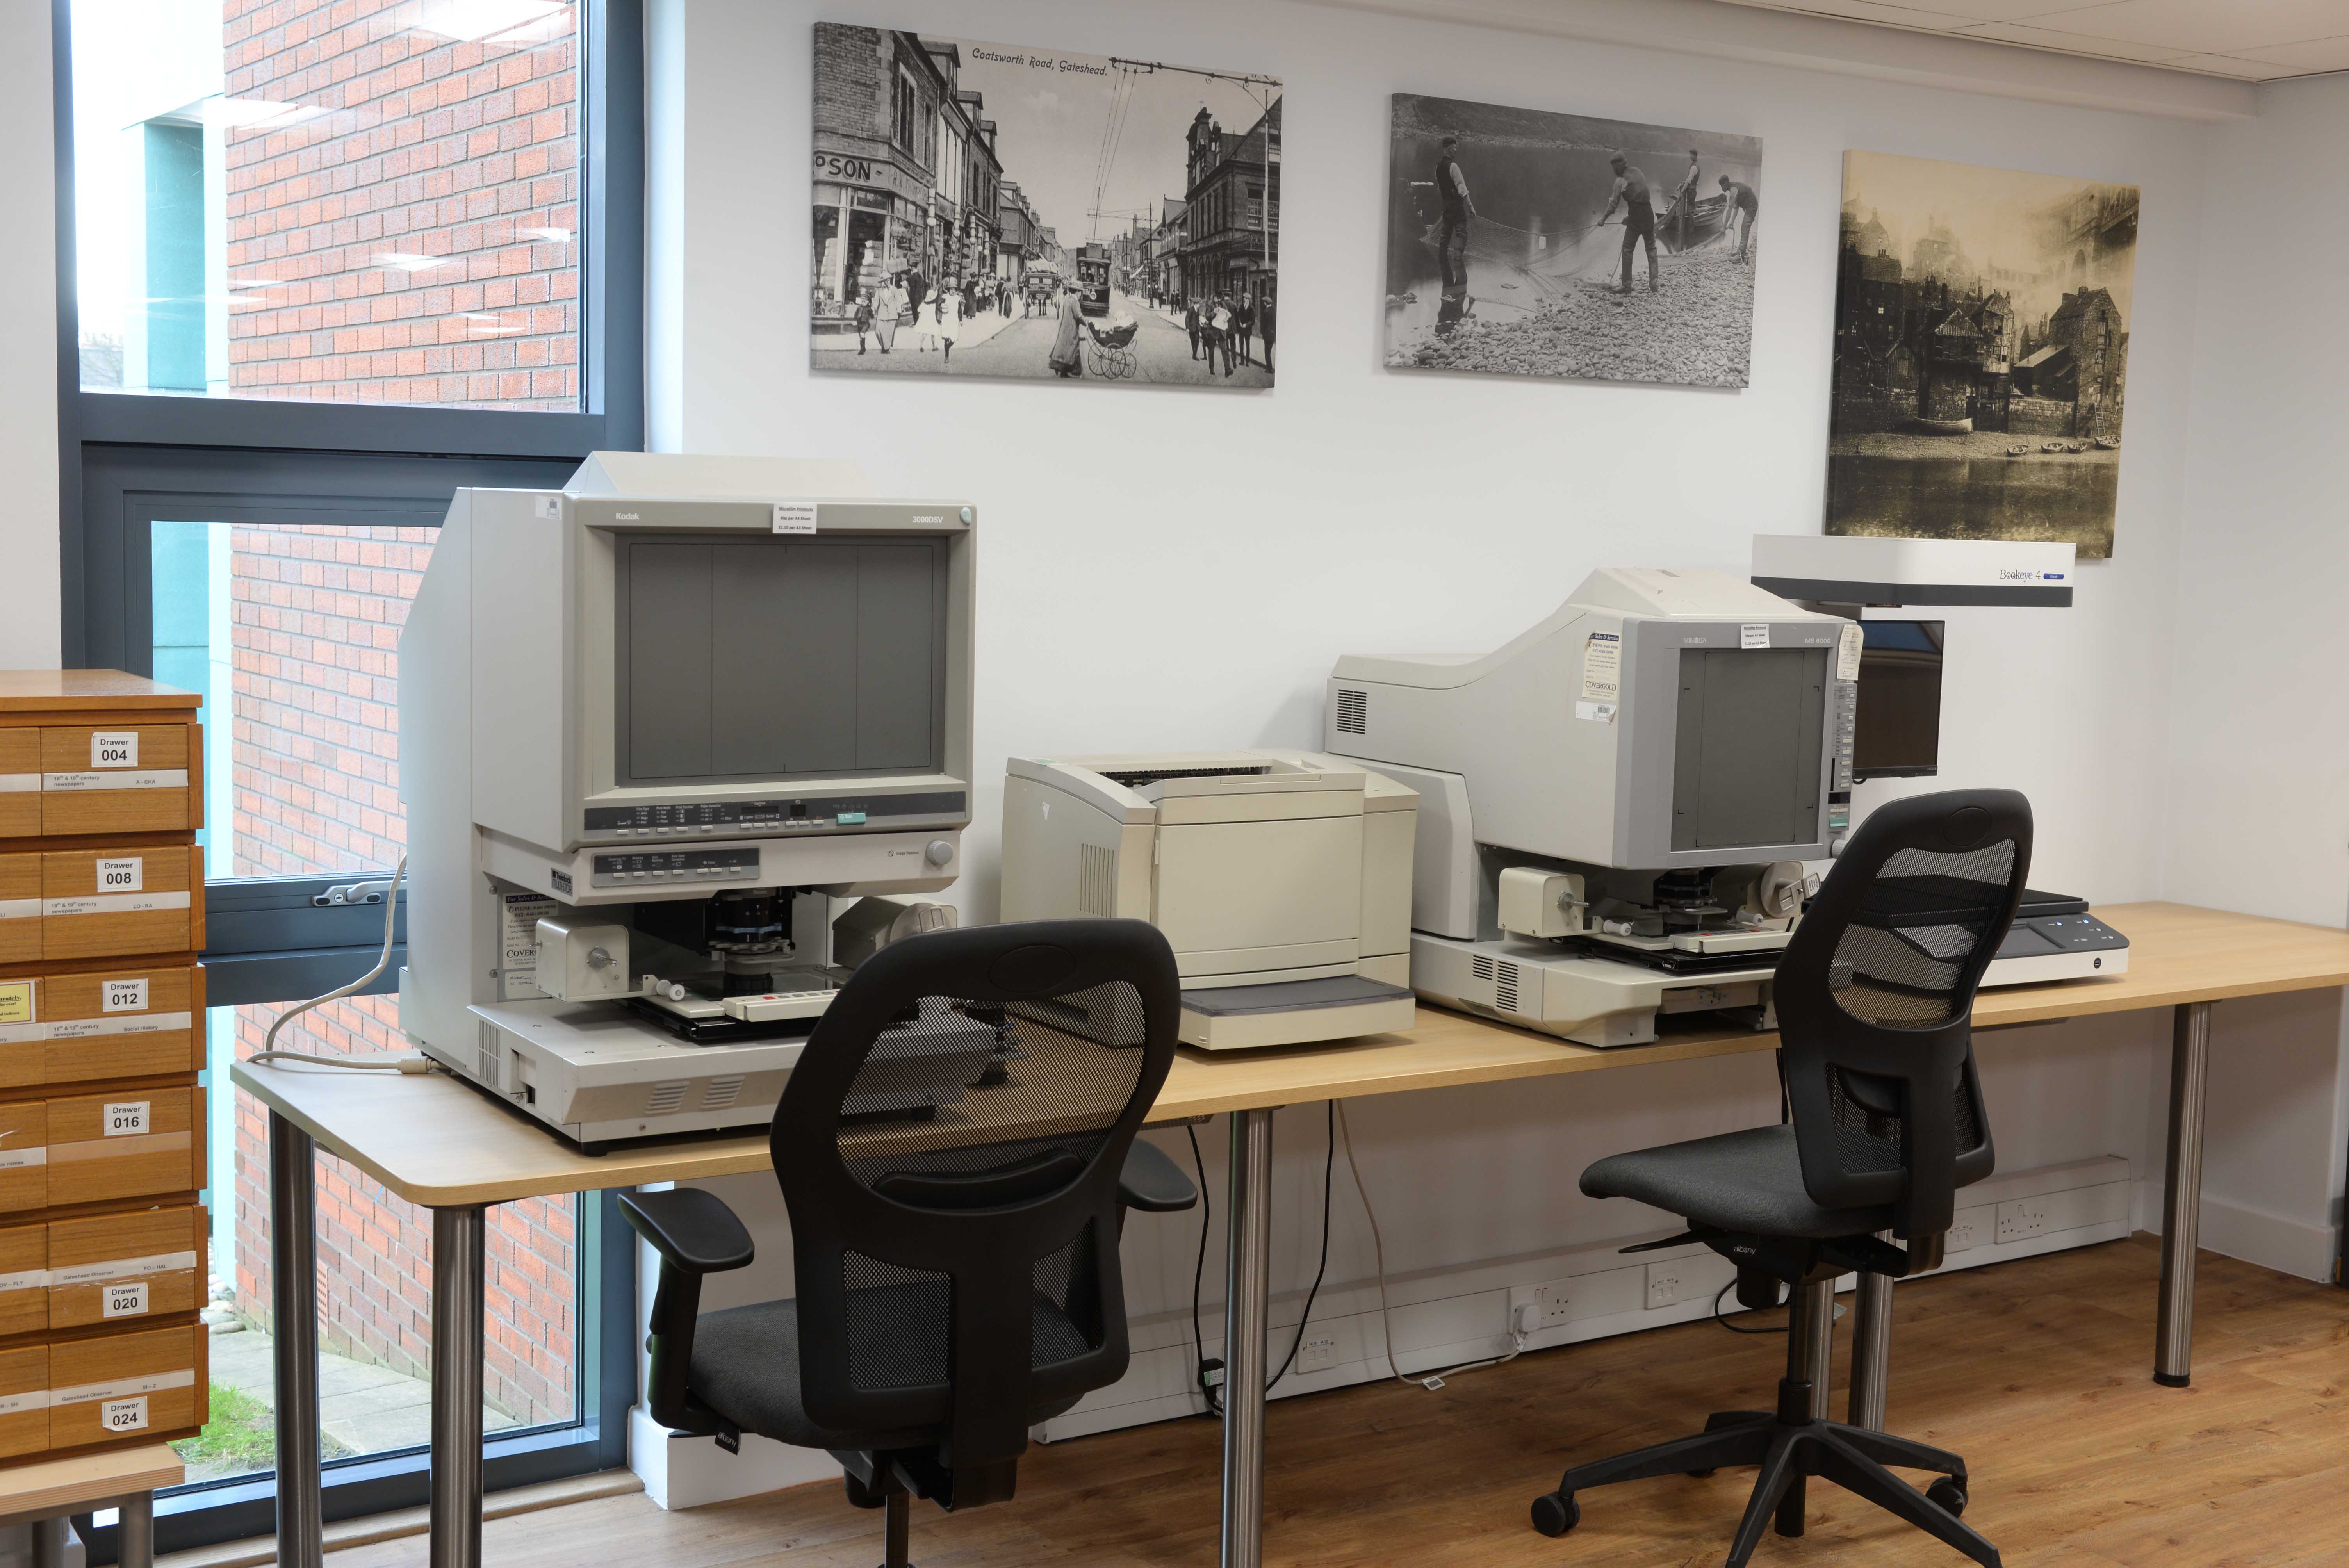 Canvas prints of early photographs decorate walls above microfilm readers